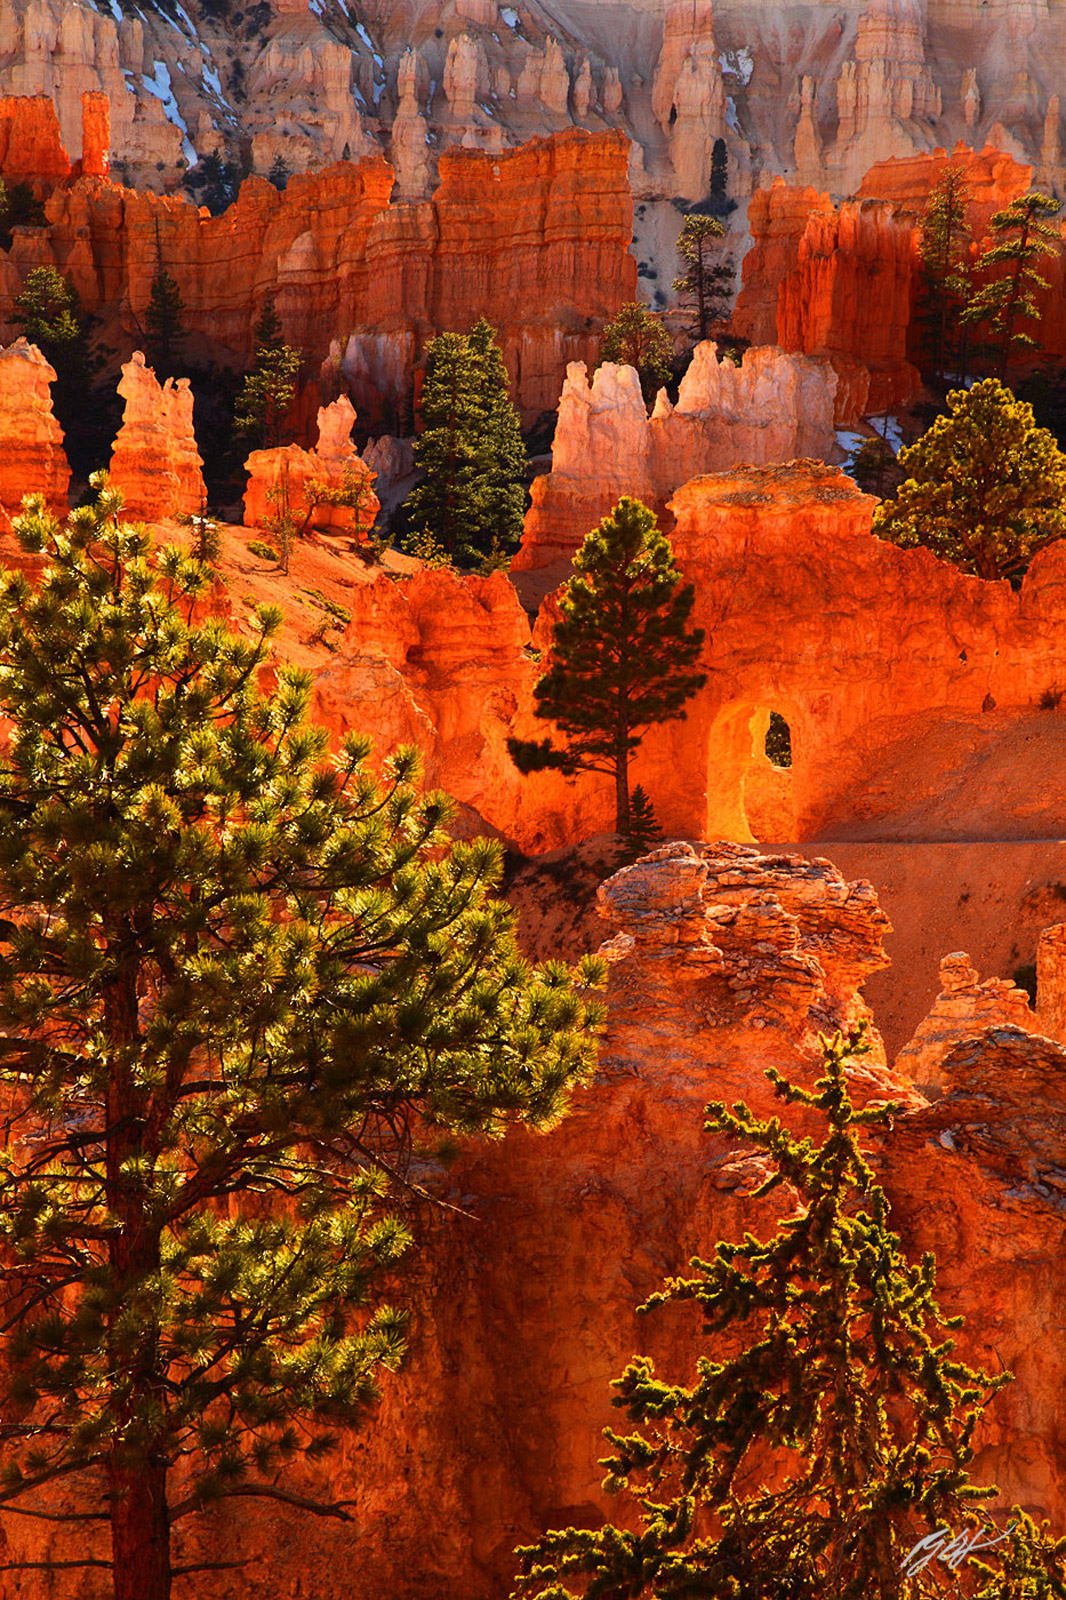 Peak-a-Book Passage on the Peak-a-Boo Trail in Bryce Canyon National Park in Utah